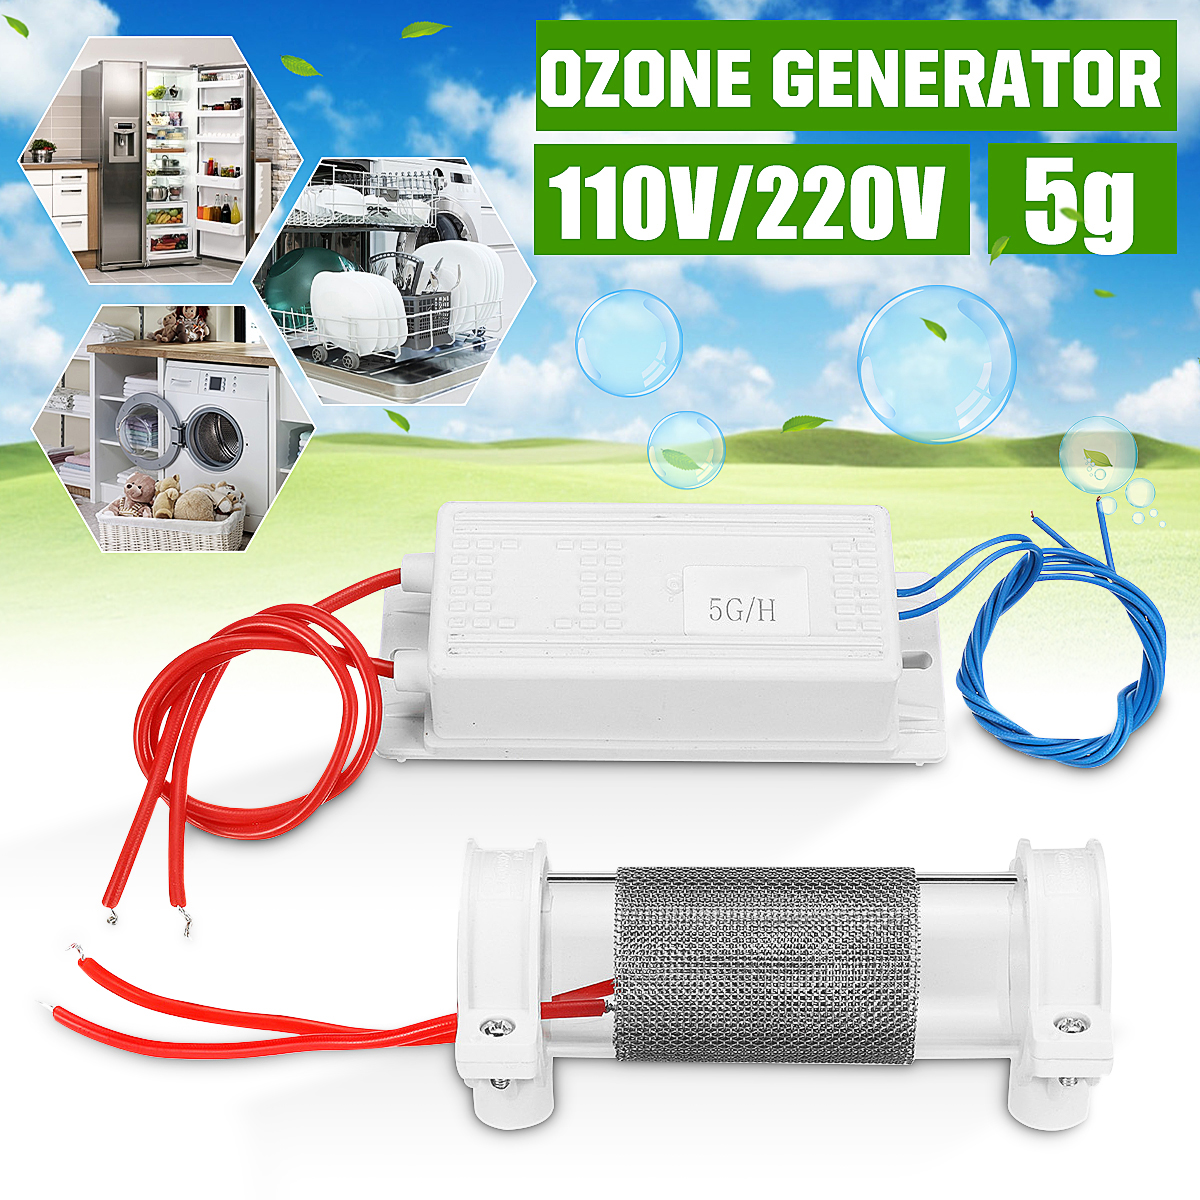 5gh-Ozone-Generator-Air-Water-Air-Purifier-For-Dishwasher-Refrigerator-Cabinet-1628324-1